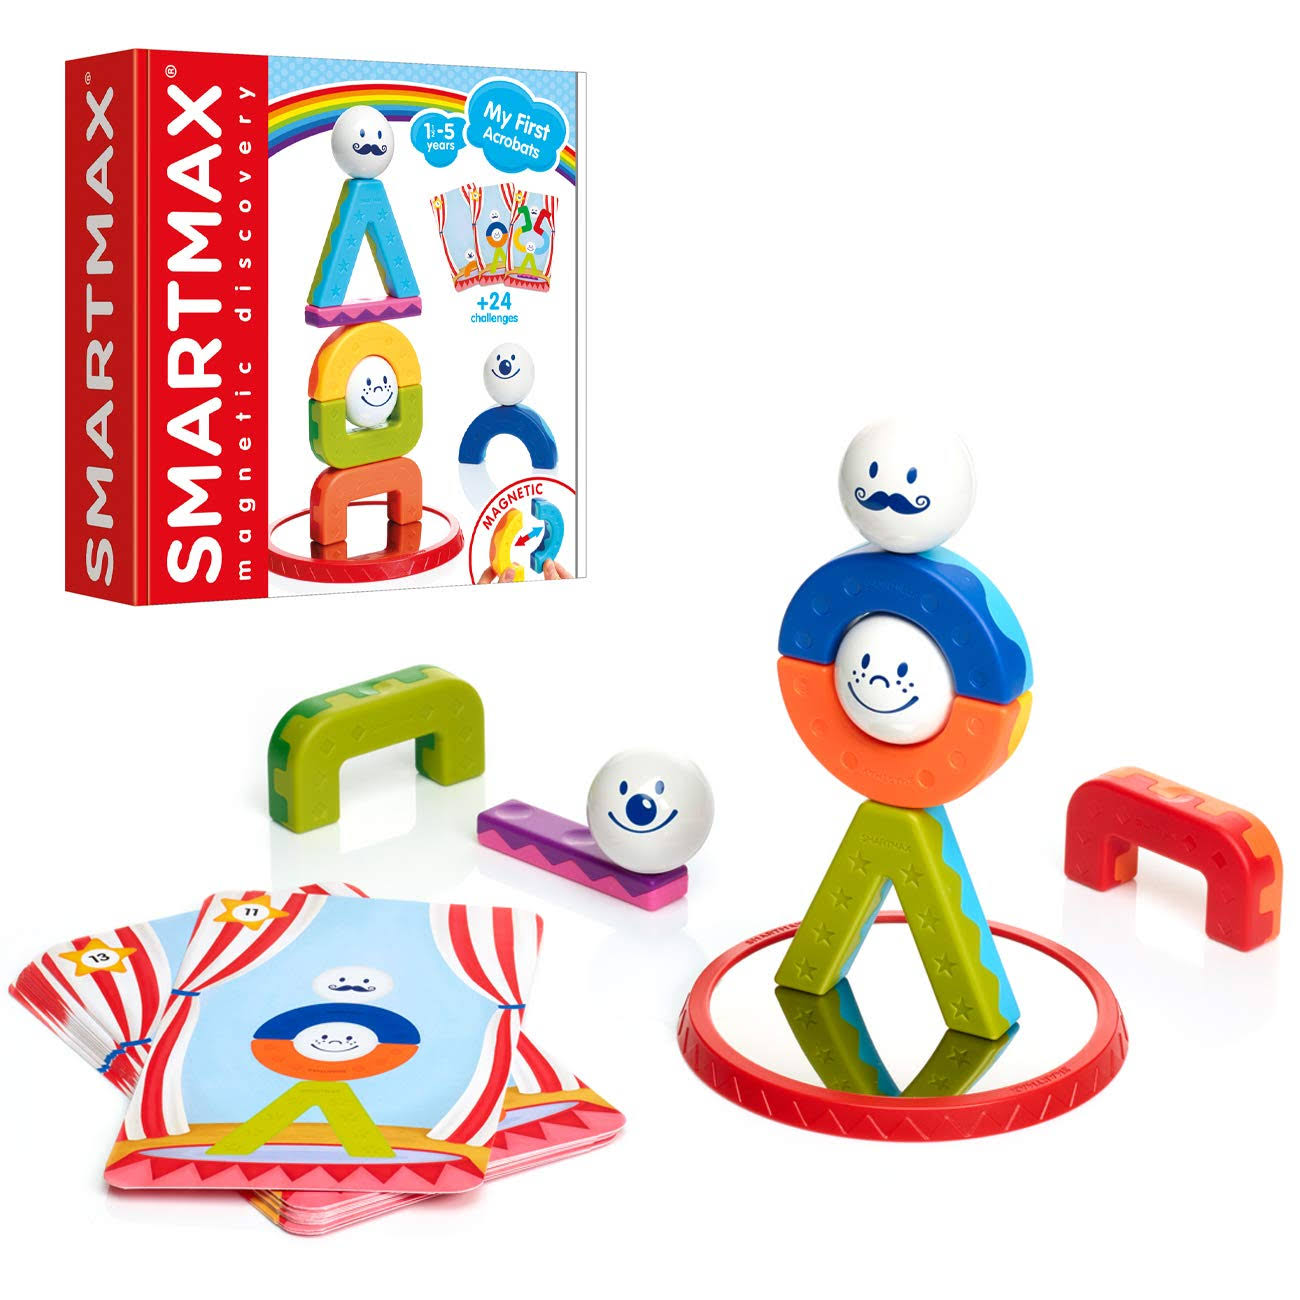 SmartMax My First Acrobats Stem Magnetic Toy with Building Challenges